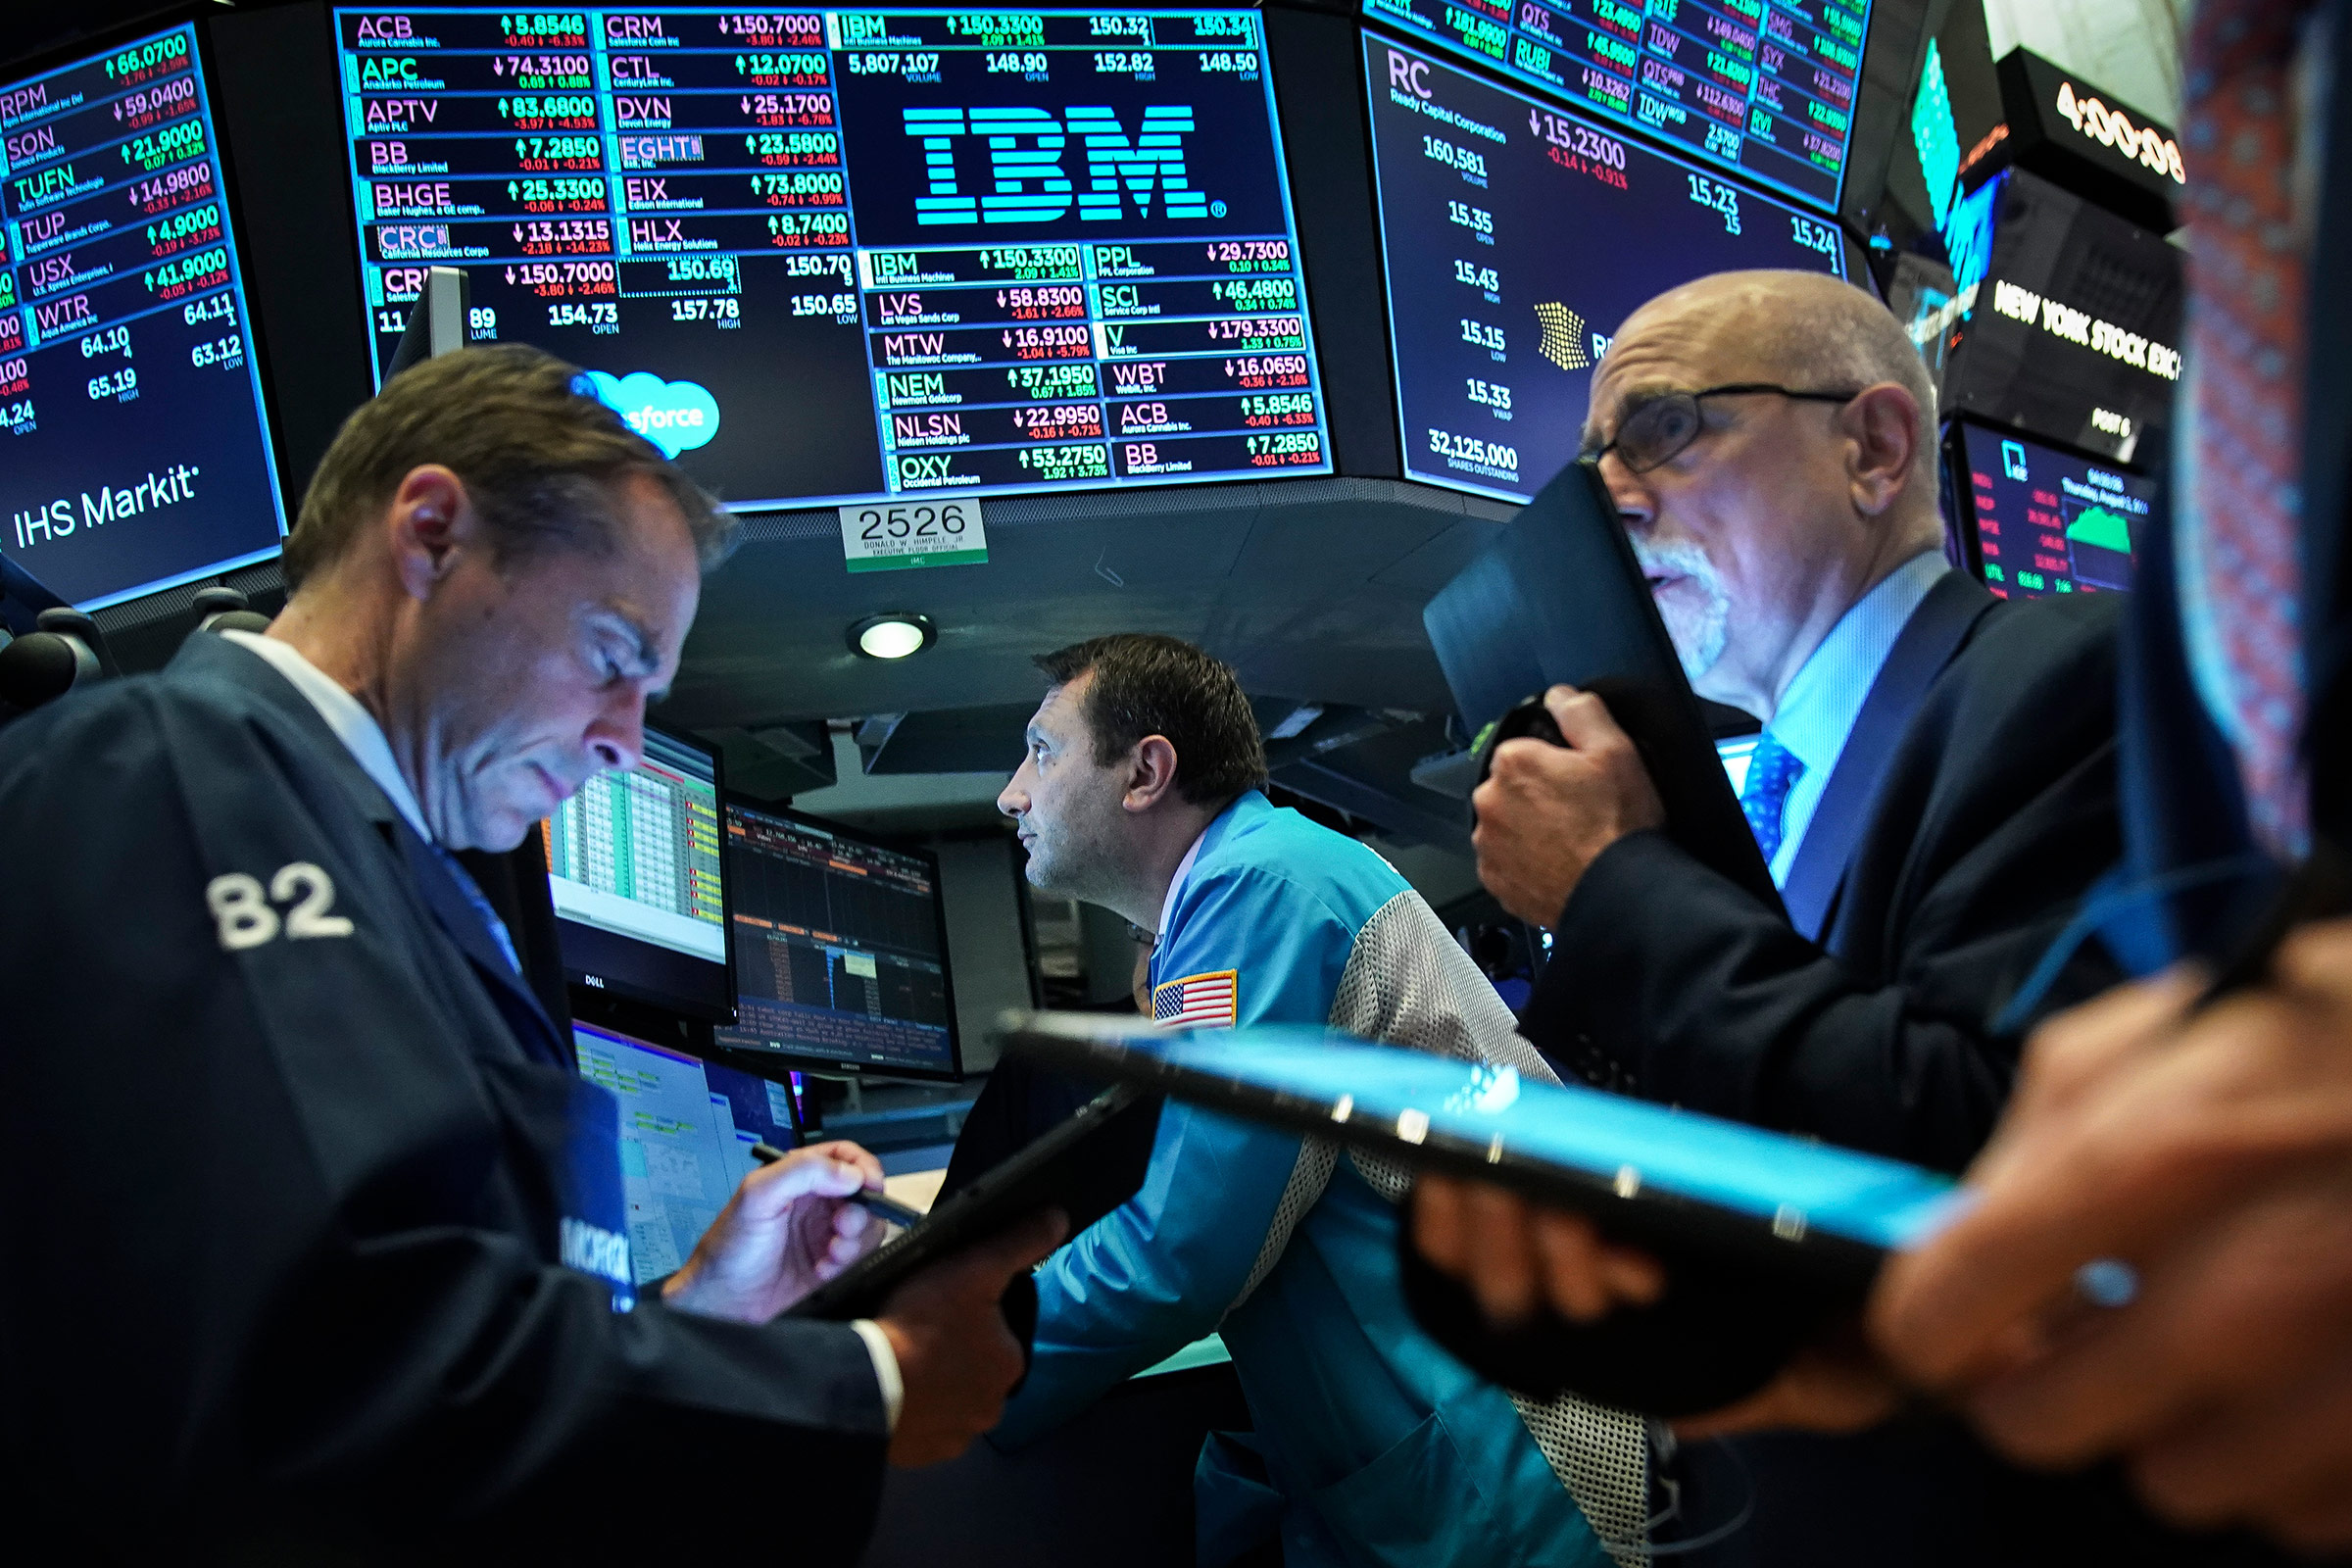 Traders and financial professionals work ahead of the closing bell on the floor of the New York Stock Exchange on Aug. 1, 2019 in New York City. Following large gains earlier in the day, U.S. markets dropped sharply after an afternoon tweet by U.S. President Donald Trump announcing his plans to impose a 10 percent tariff on an additional $300 billion worth of Chinese imports. (Drew Angerer—Getty Images)